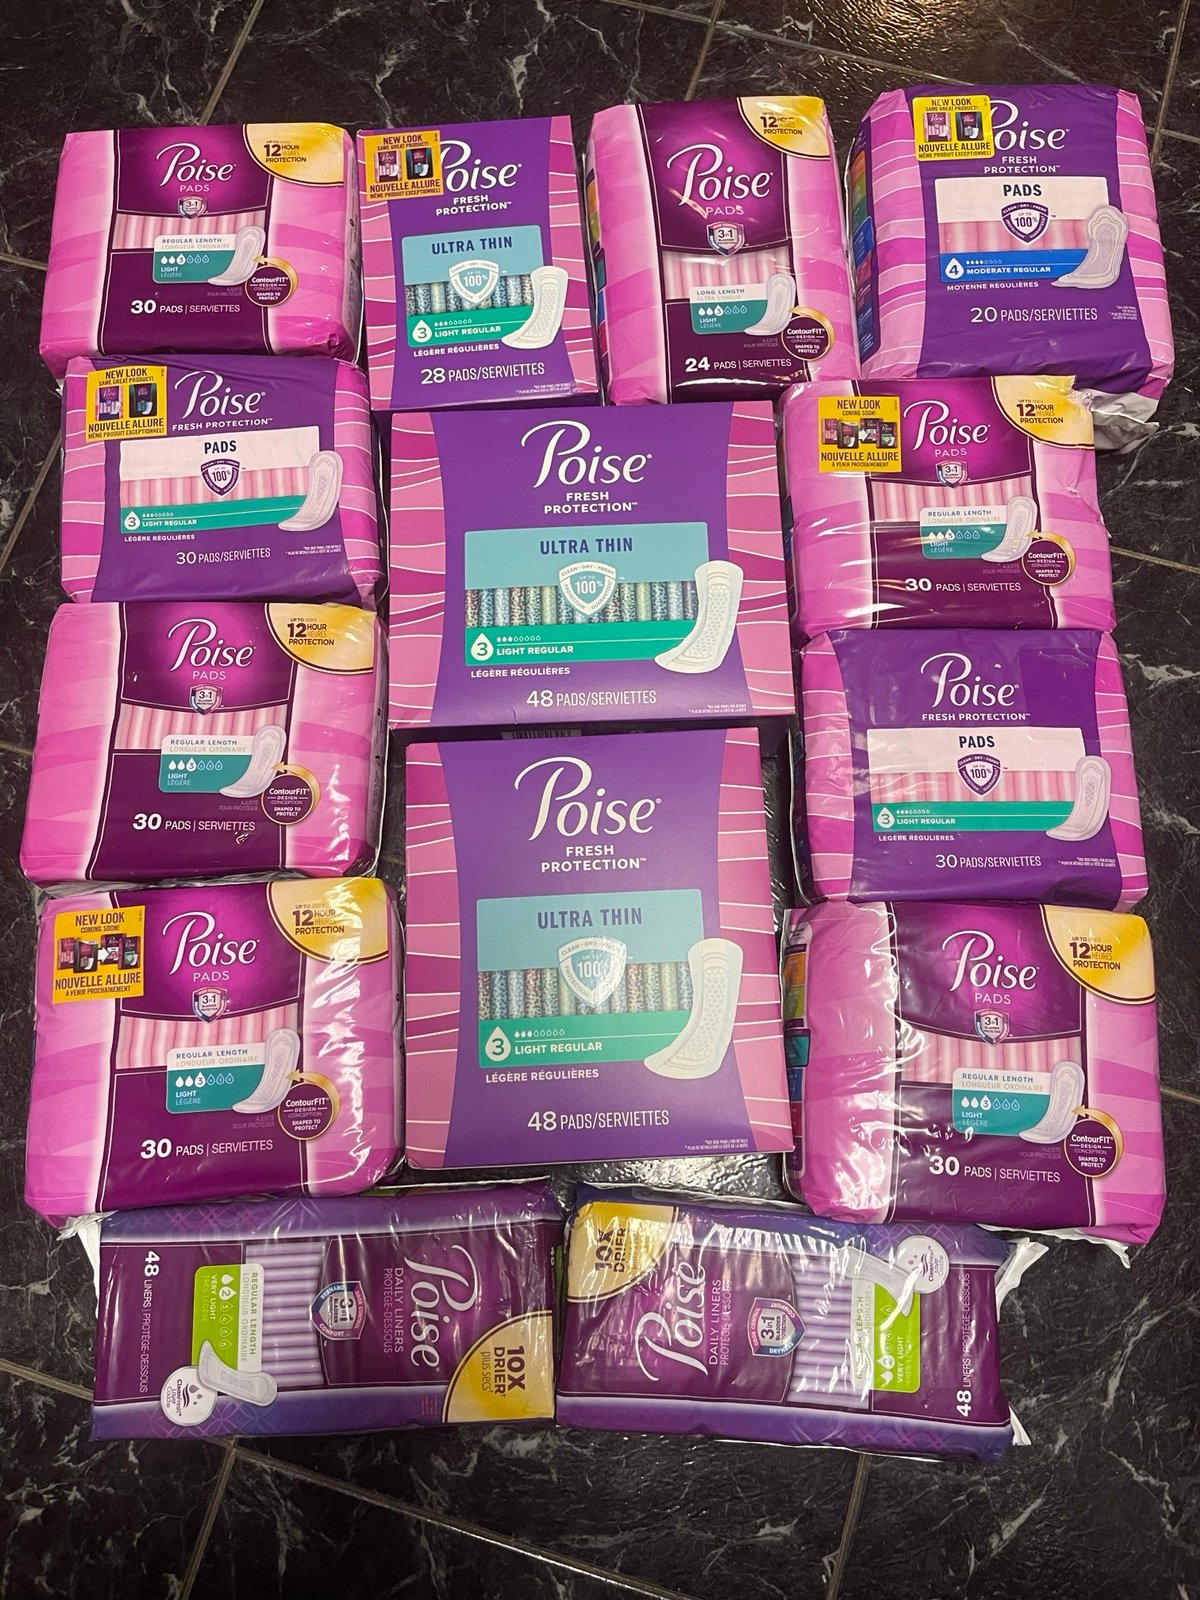 Poise Incontinence Pads & Liners Bundle aTEDCEgMA